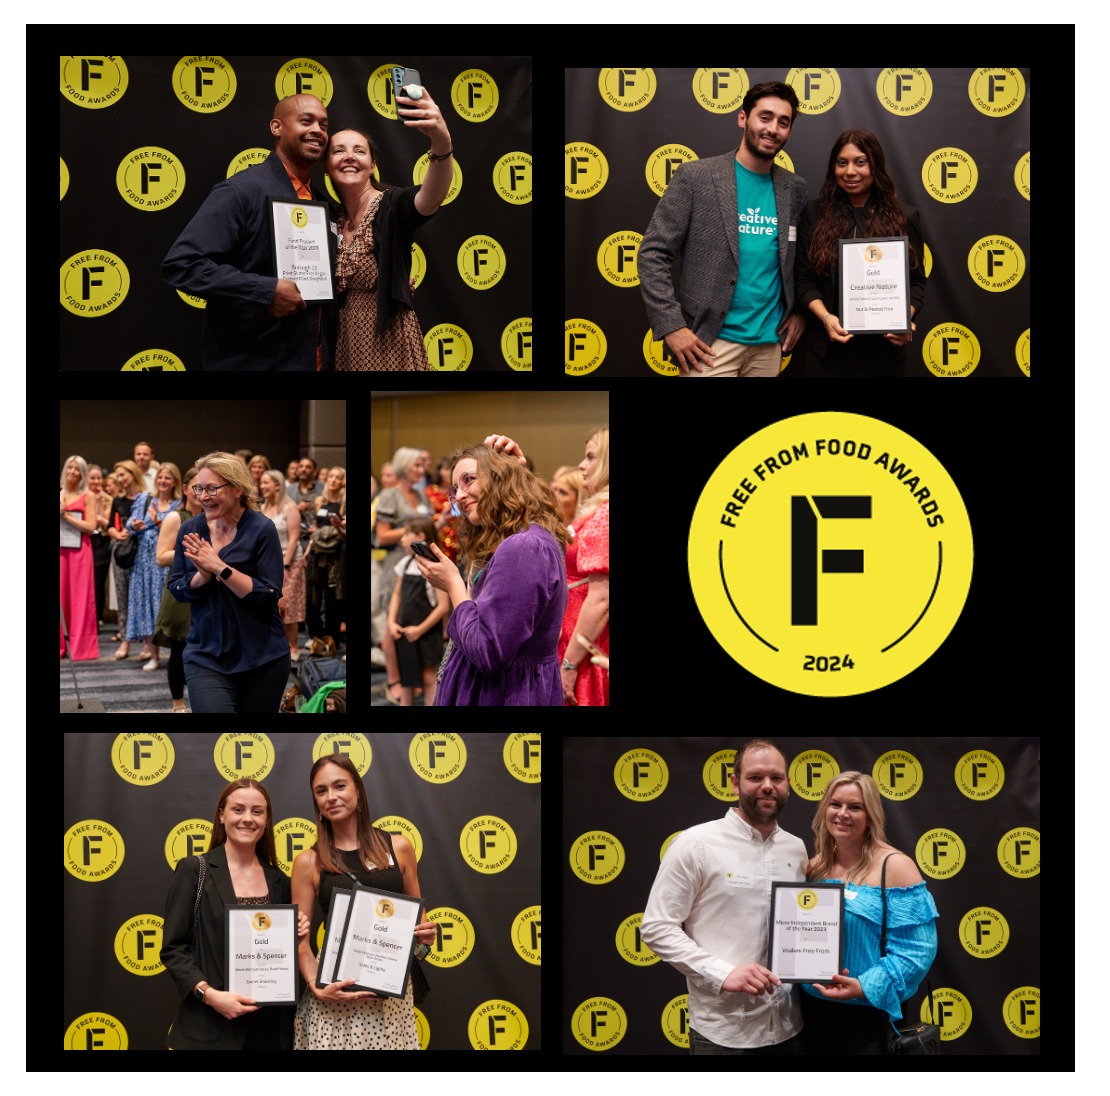 We are proudly co-locating our Awards Presentation Party with the first ever @AllergyShow Allergy & Free From Business Event on Friday 21 June at Copthorne Tara Hotel London. Early Bird ticket sales end at midnight on 31st May. Register today: whova.com/portal/registr… #FFFA24